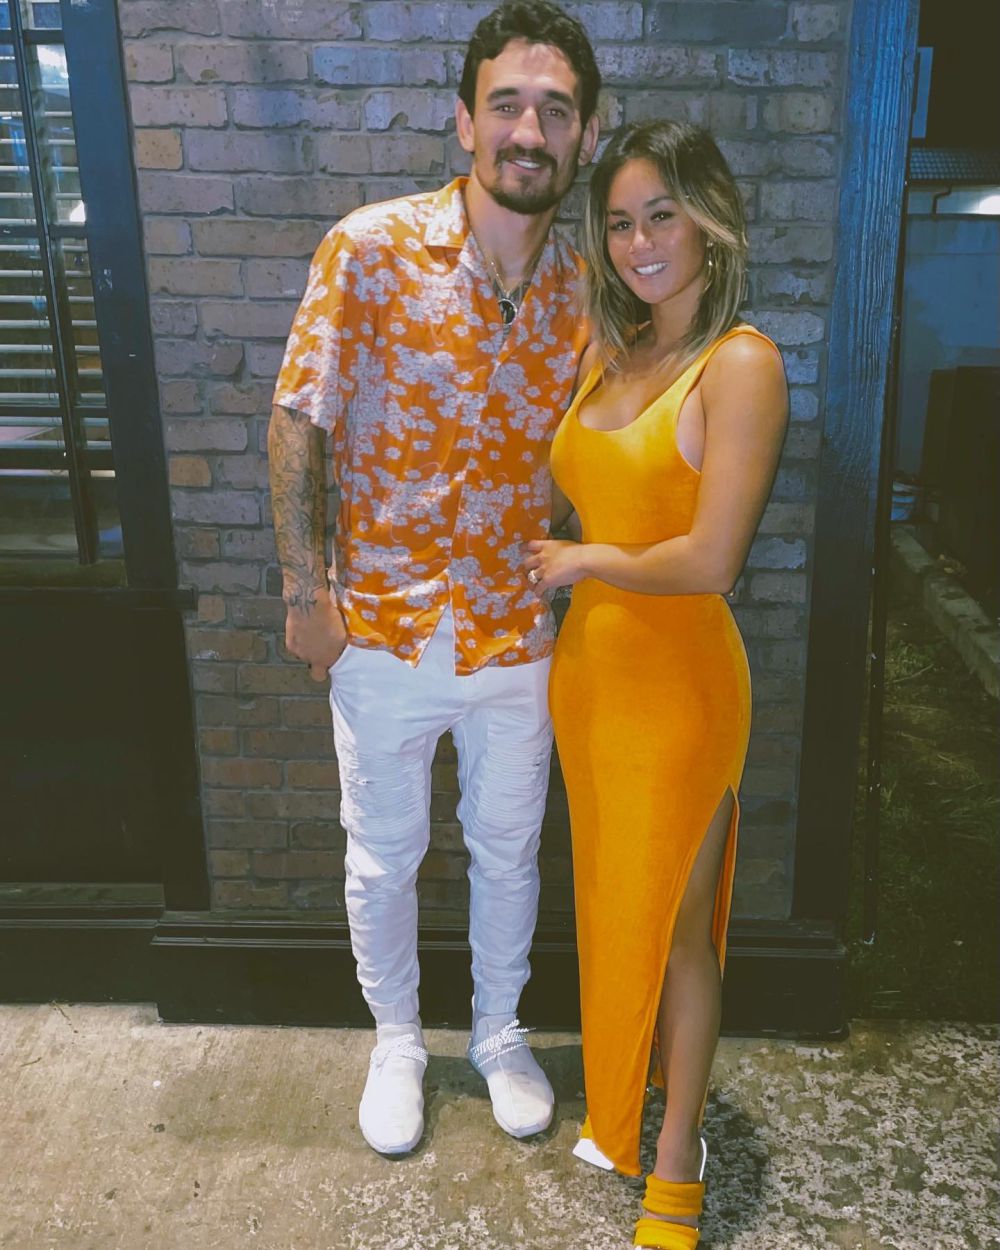 7 Ide Outfit ala Max Holloway yang Manly Abis, Stunning!